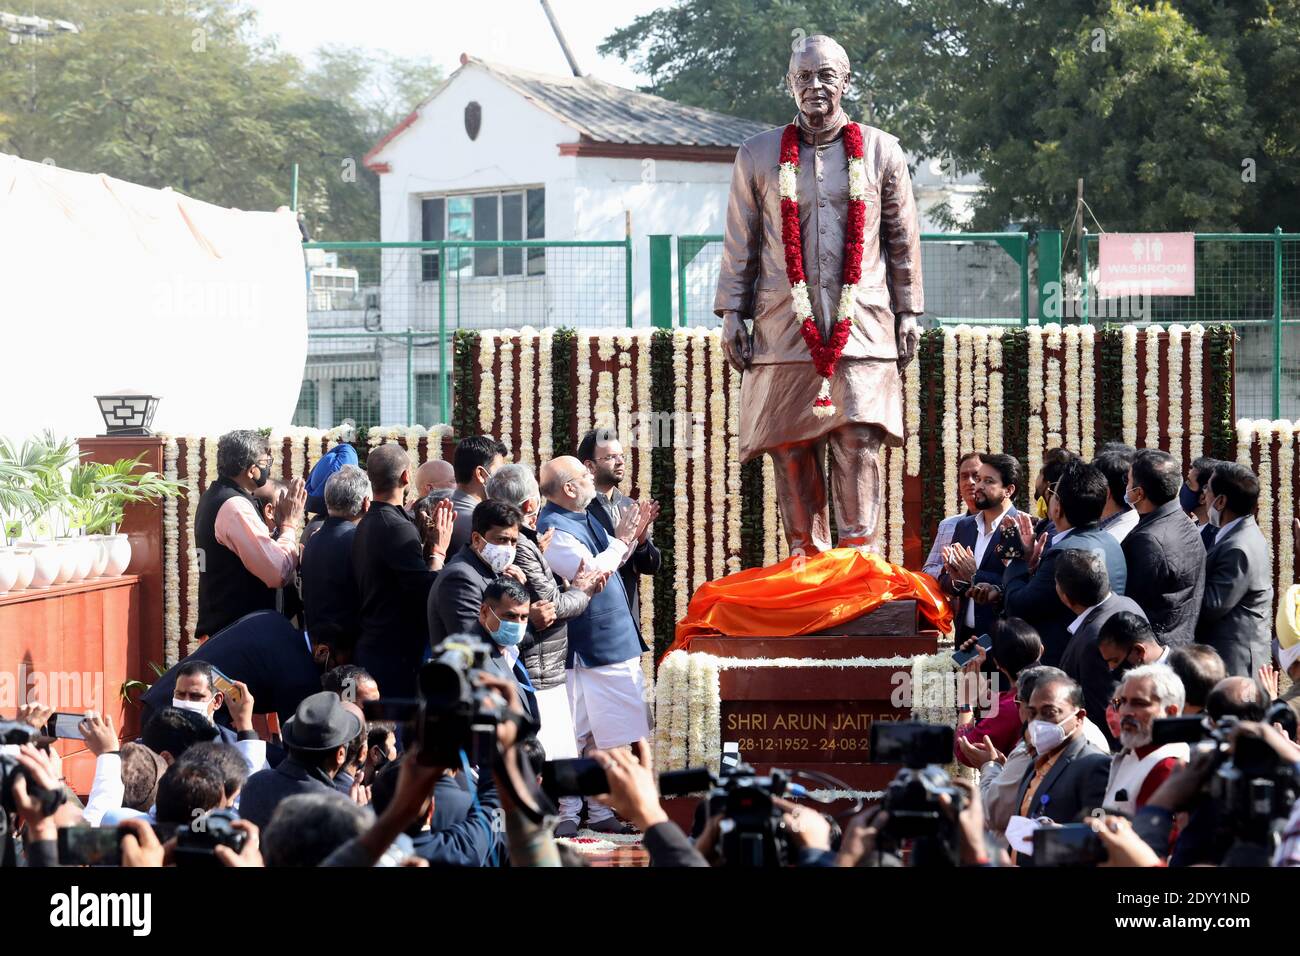 India Union Home Minister Amit Shah, unveils a life-sized statue of the late Arun Jaitley, at the Arun Jaitley stadium, Feroz Shah Kotla ground. Arun Jaitley was Delhi and District Cricket Association (DDCA) President for 13 Years. Stock Photo